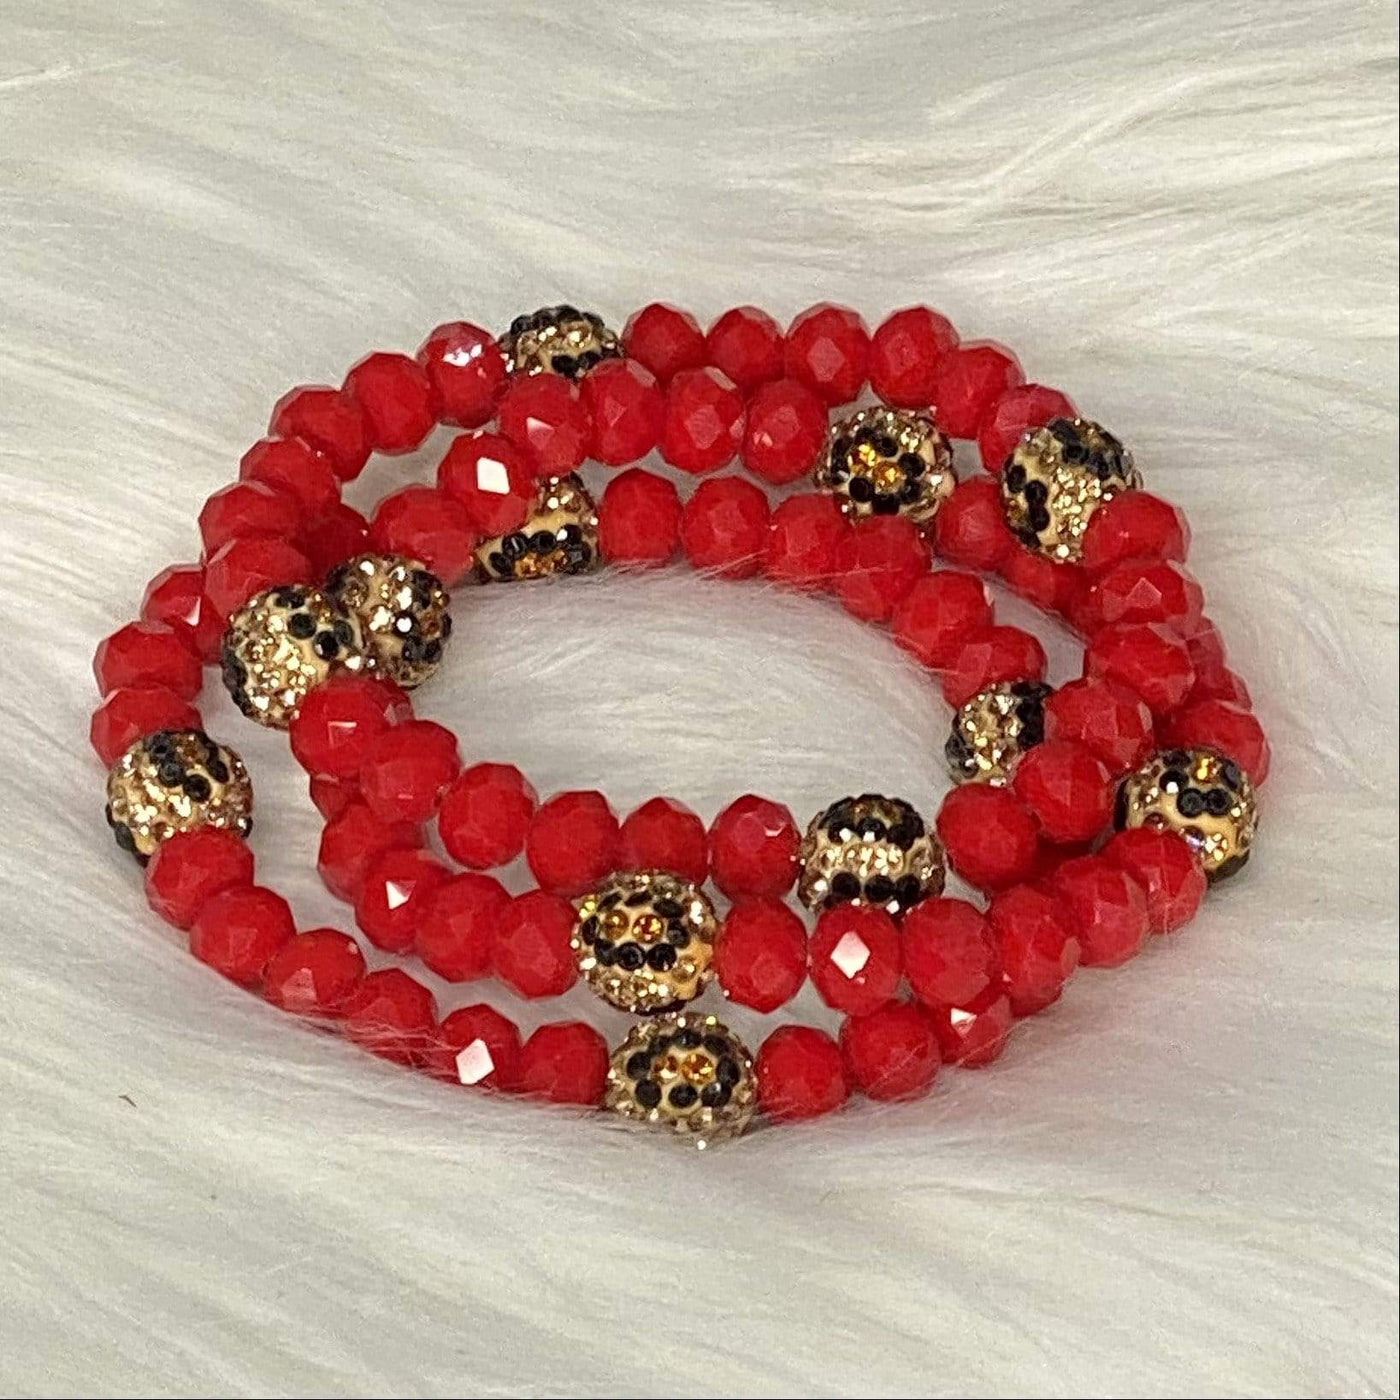 Red and Leopard Crystal Bracelet Shabby Chic Boutique and Tanning Salon